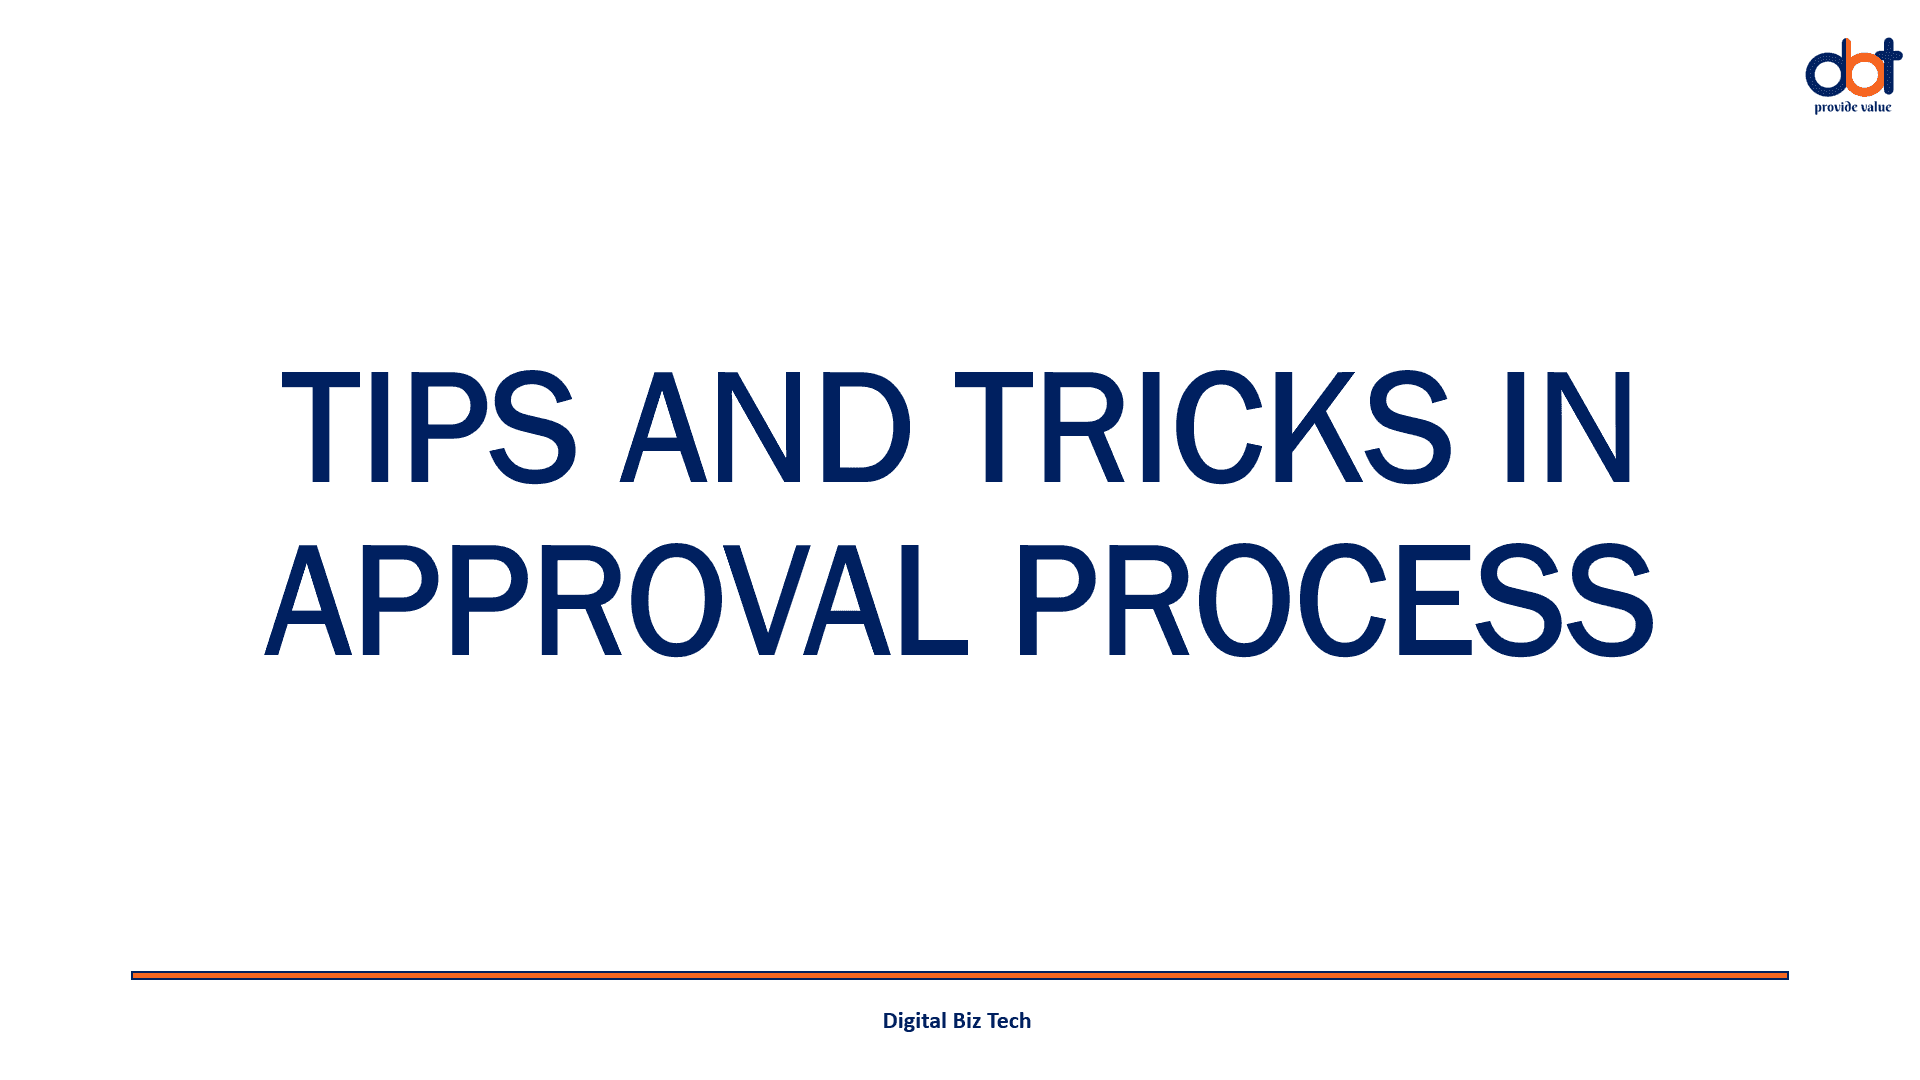 Tips and Tricks in Approval Process